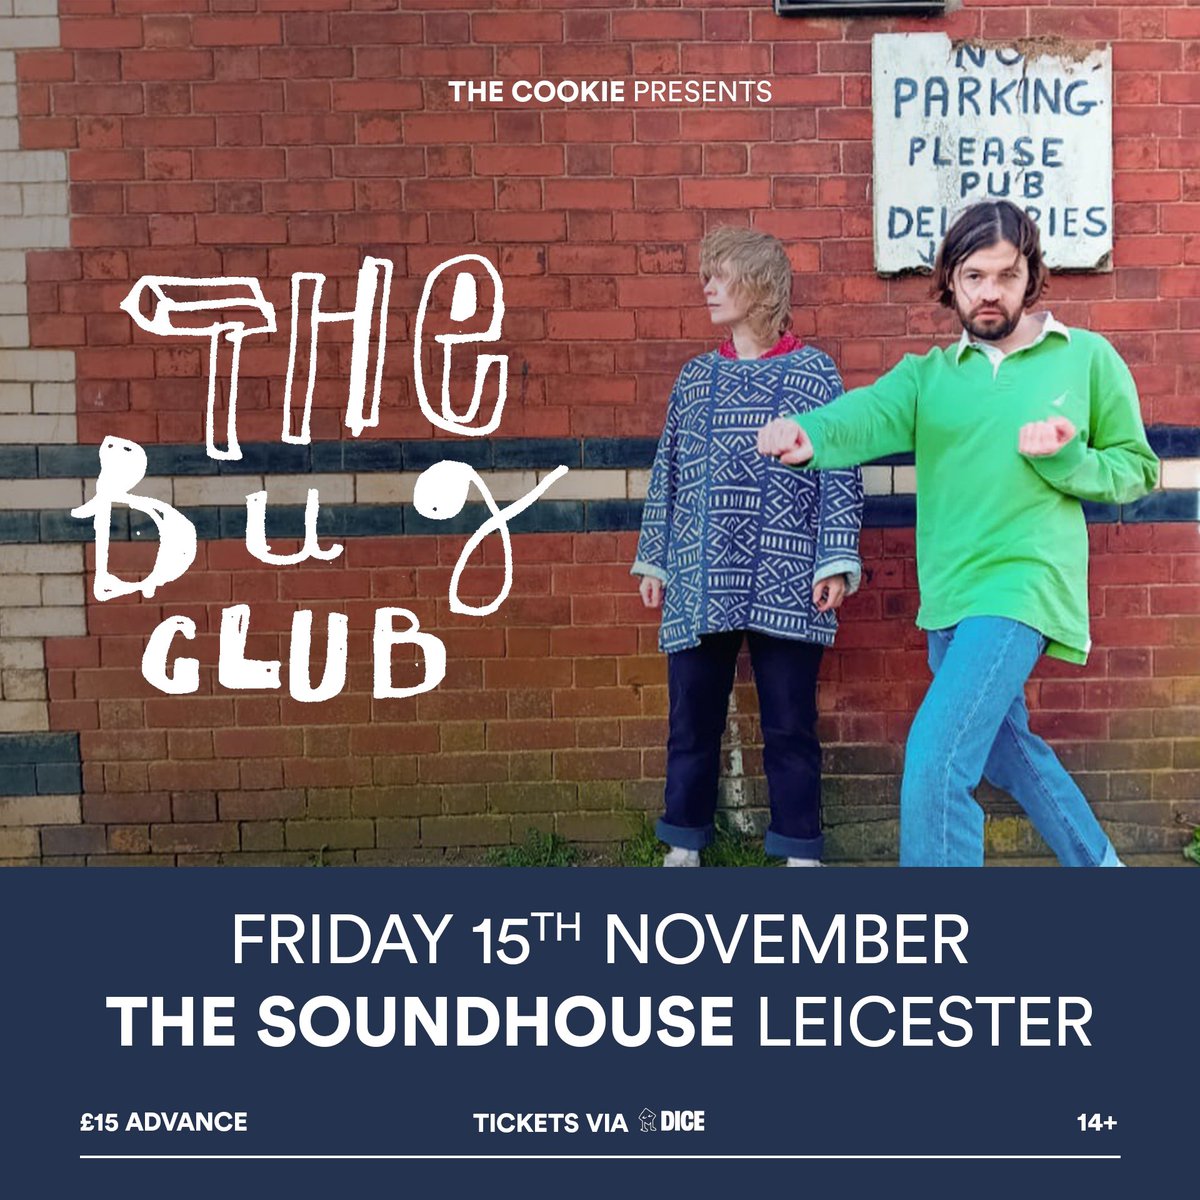 One of fav bands of recent times @thebugclubband are back on 15th November at @The_Sound_House. Tickets available Friday morning